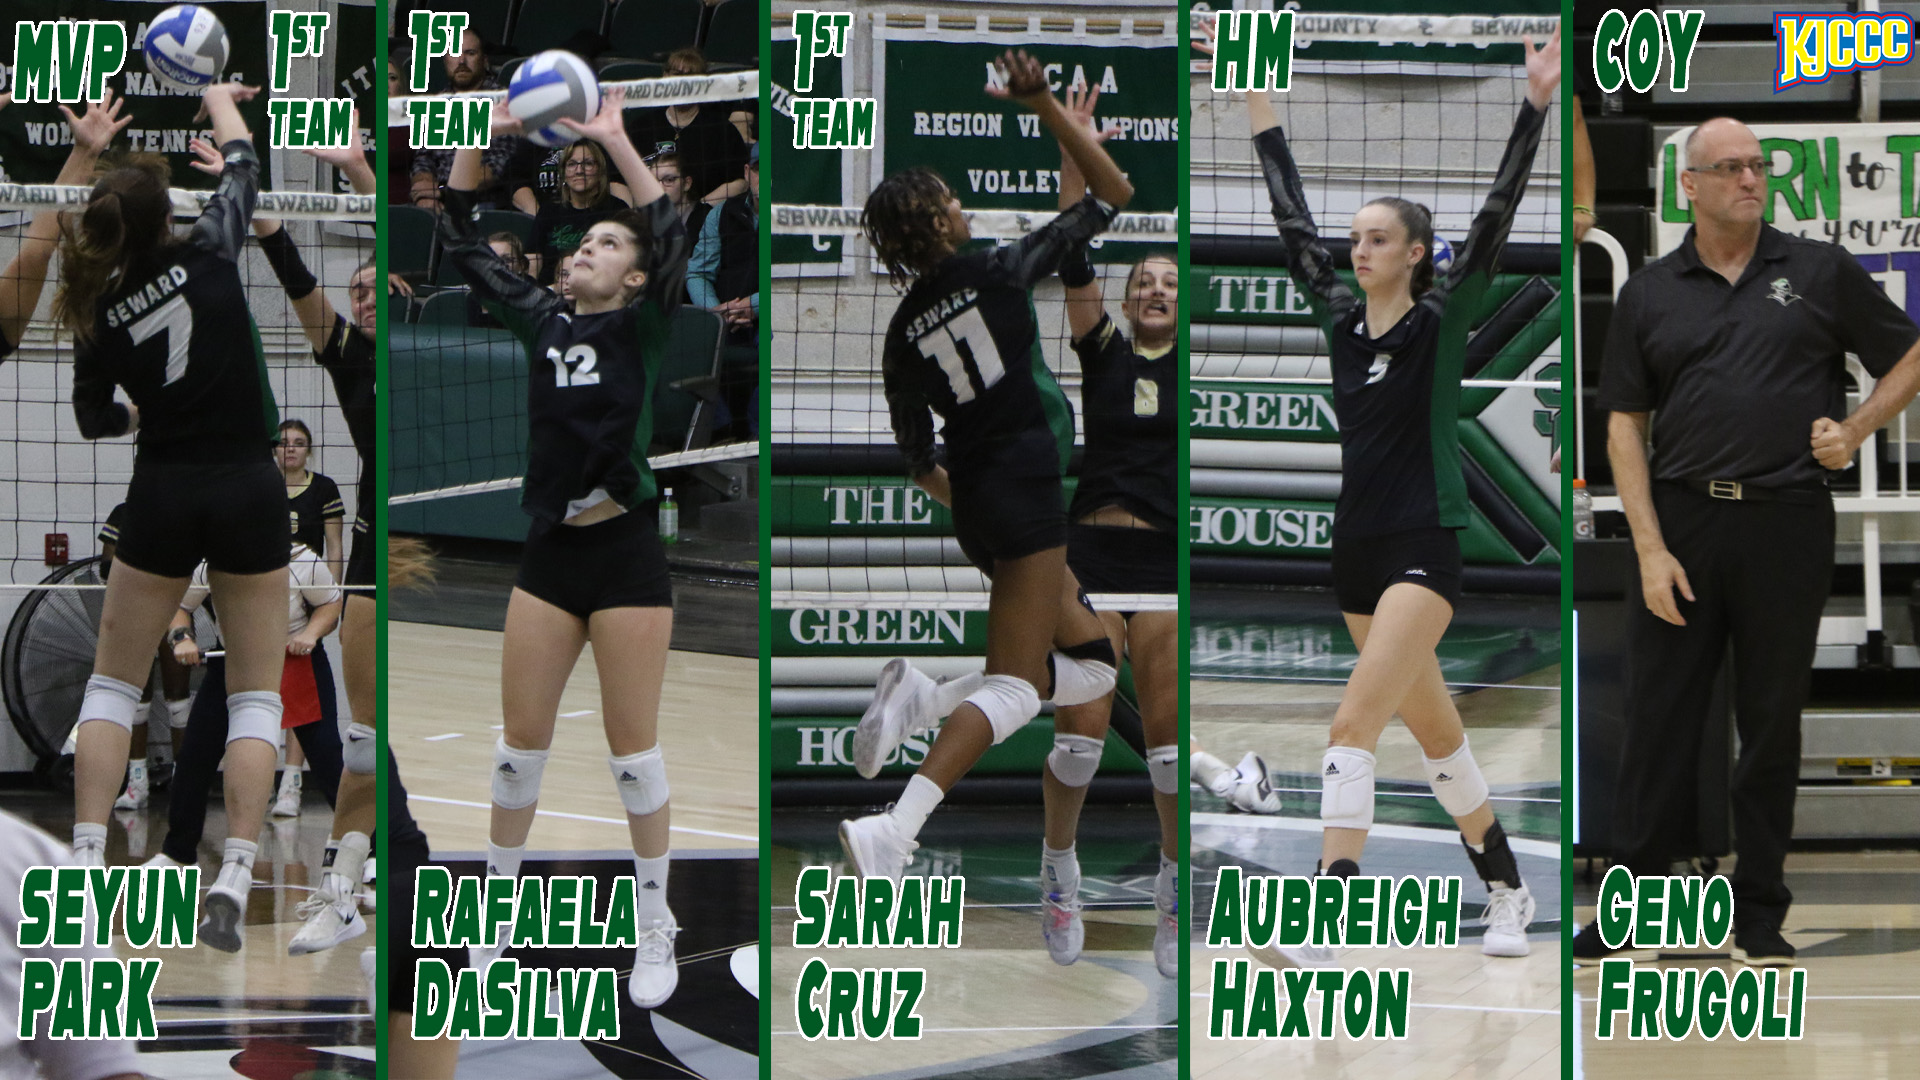 Four Lady Saints earn All-Conference awards and Frugoli named Coach of the Year